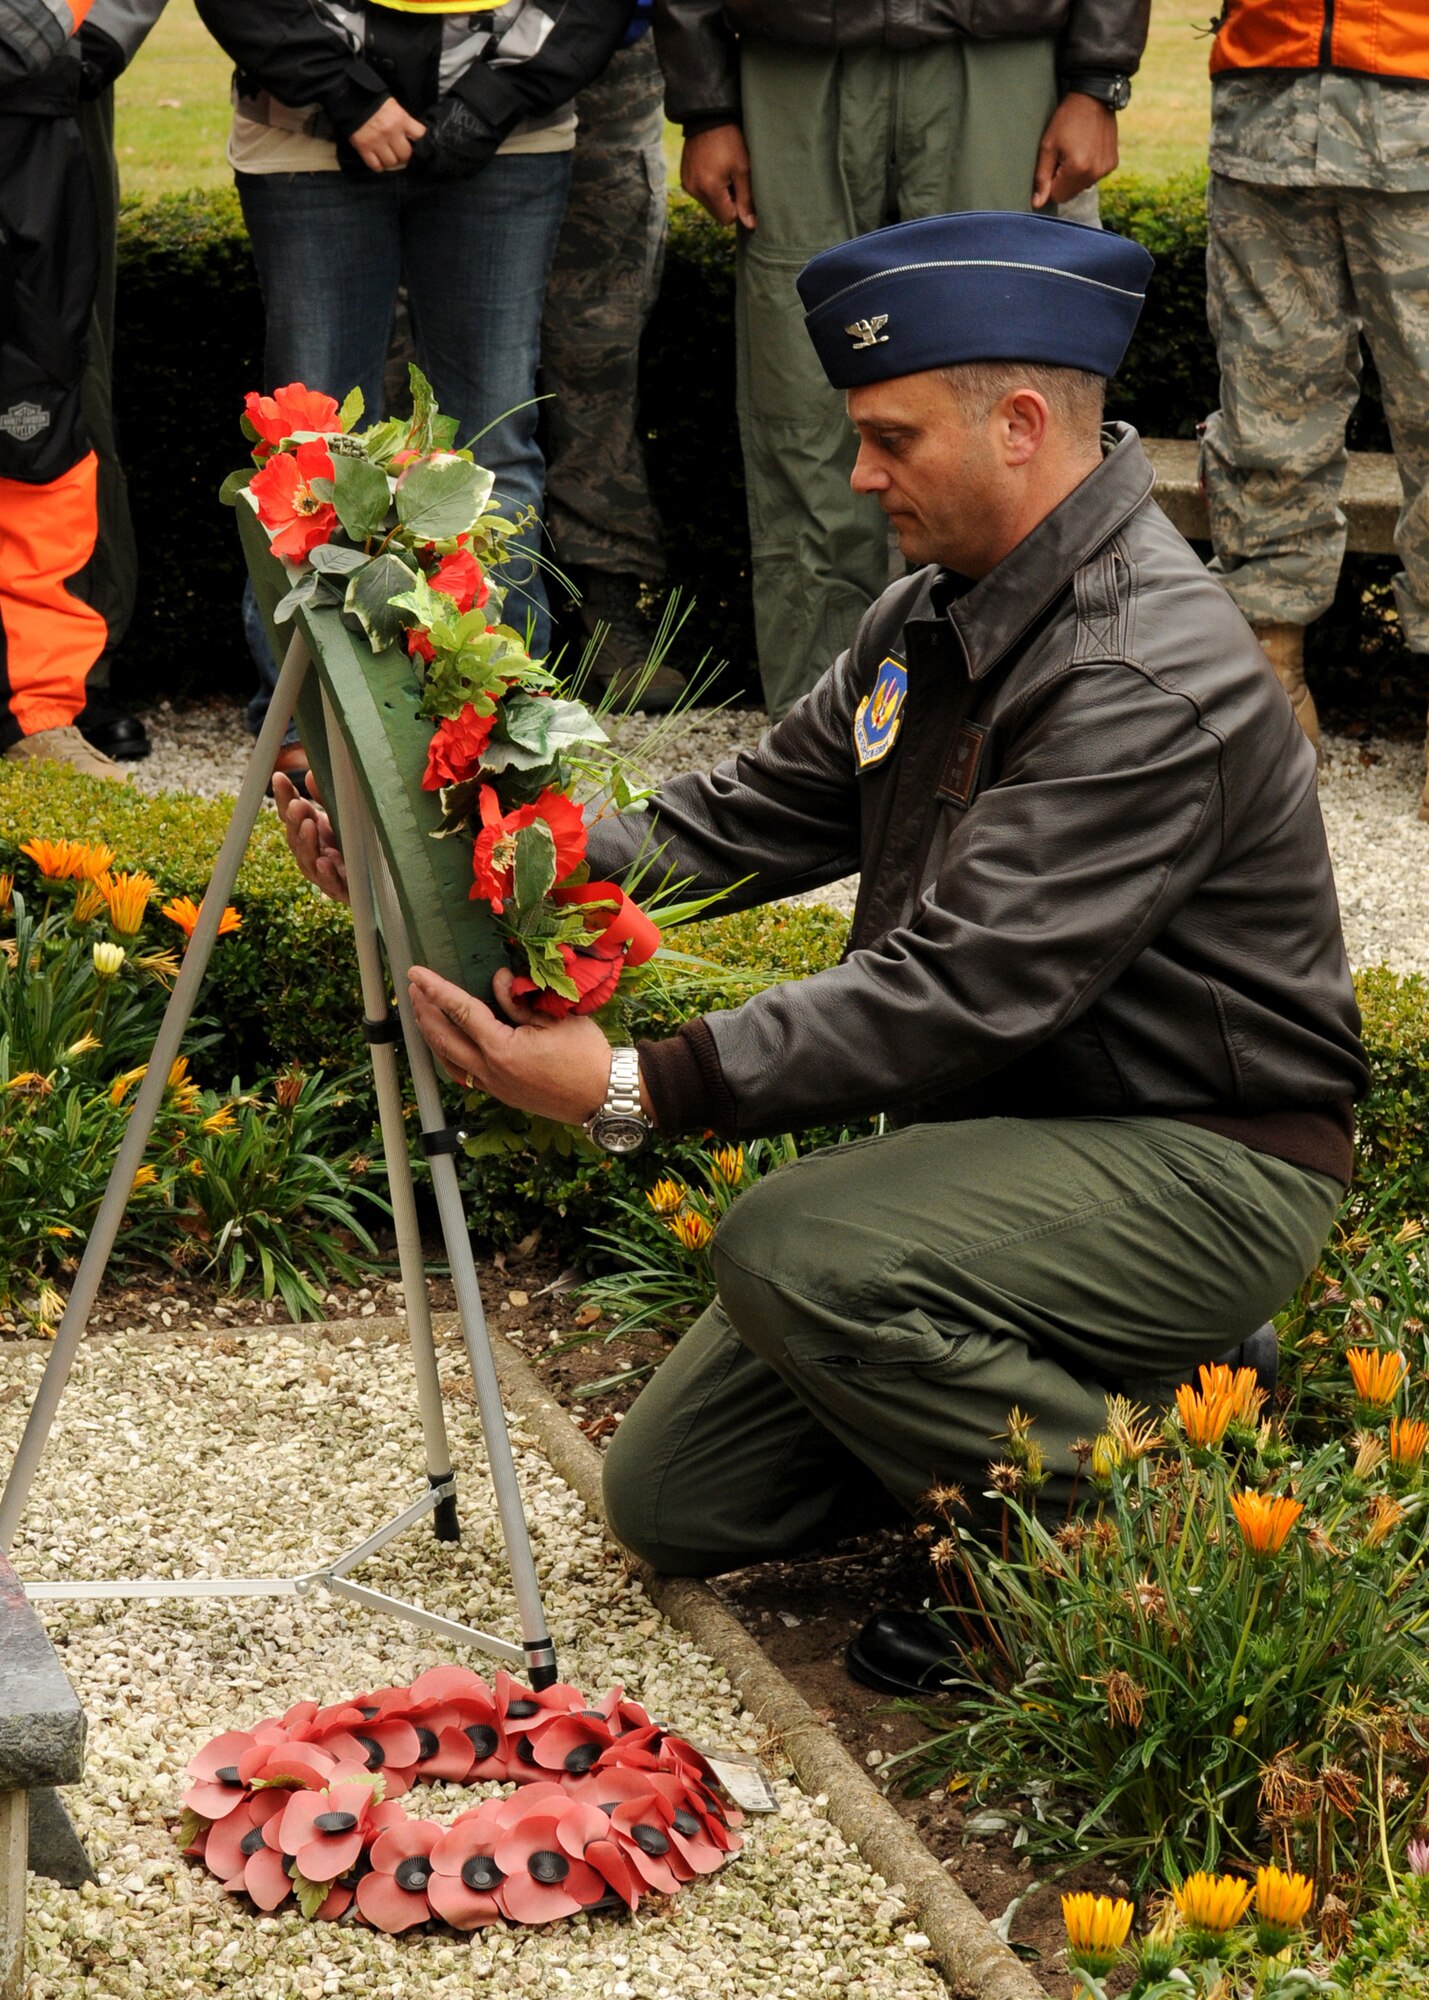 RAF MILDENHALL, England – Col. Michael F. Winters 100th Air Refueling Wing vice commander lays a wreath at the Prisoner of War/Missing in Action memorial Sept. 15. The ceremony was one of several events to remember and honor those men and women who were POW/MIA. (U.S. Air Force photo/ Staff Sgt. Jerry Fleshman)